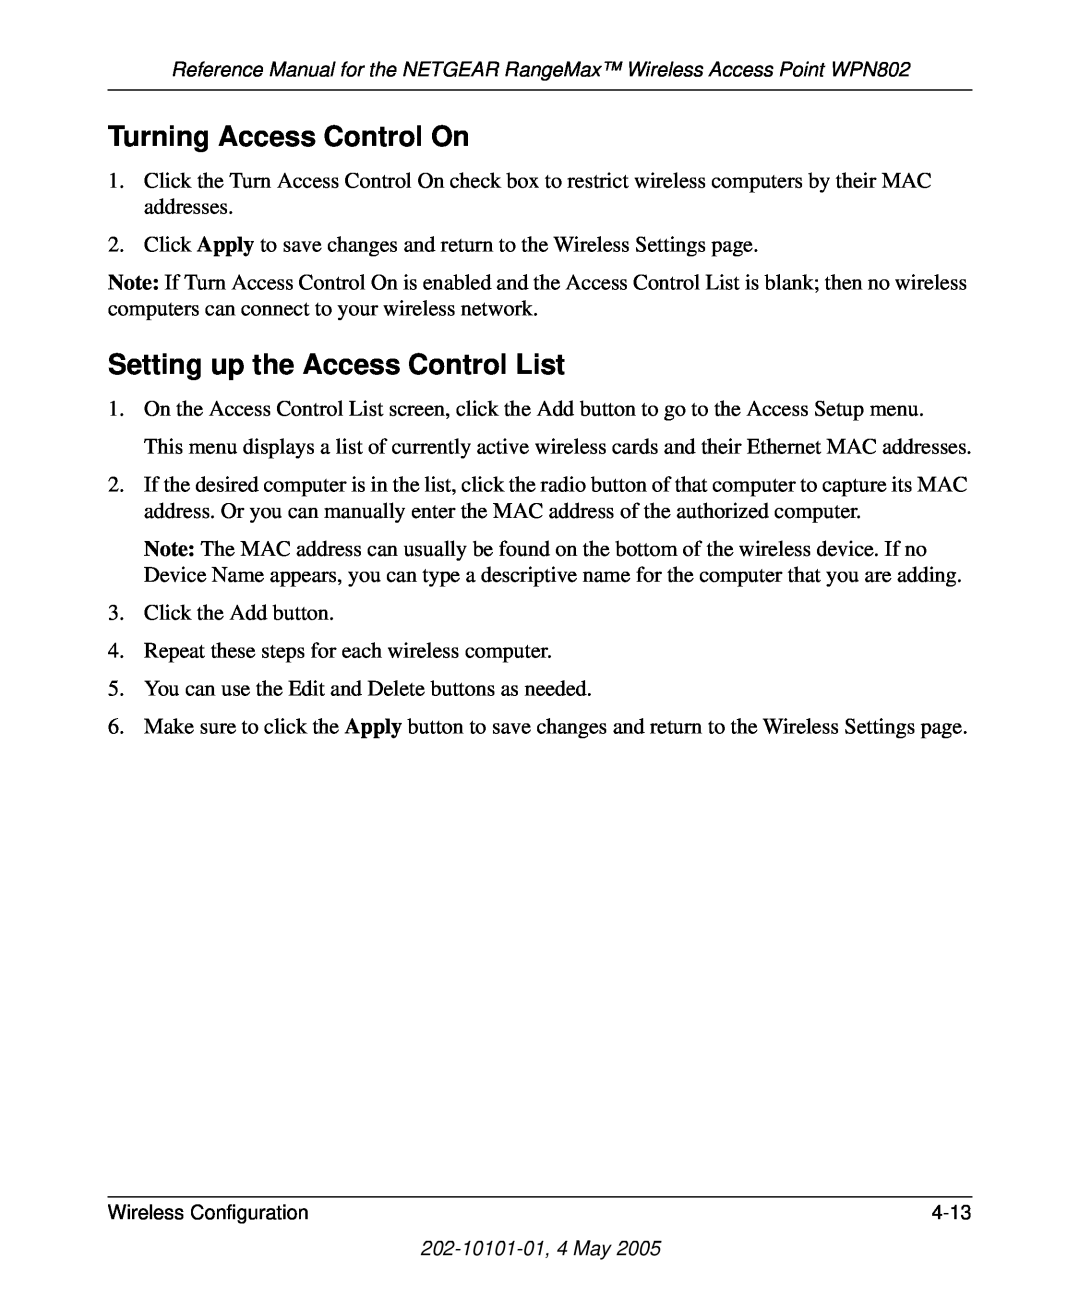 NETGEAR WPN802 manual Turning Access Control On, Setting up the Access Control List 